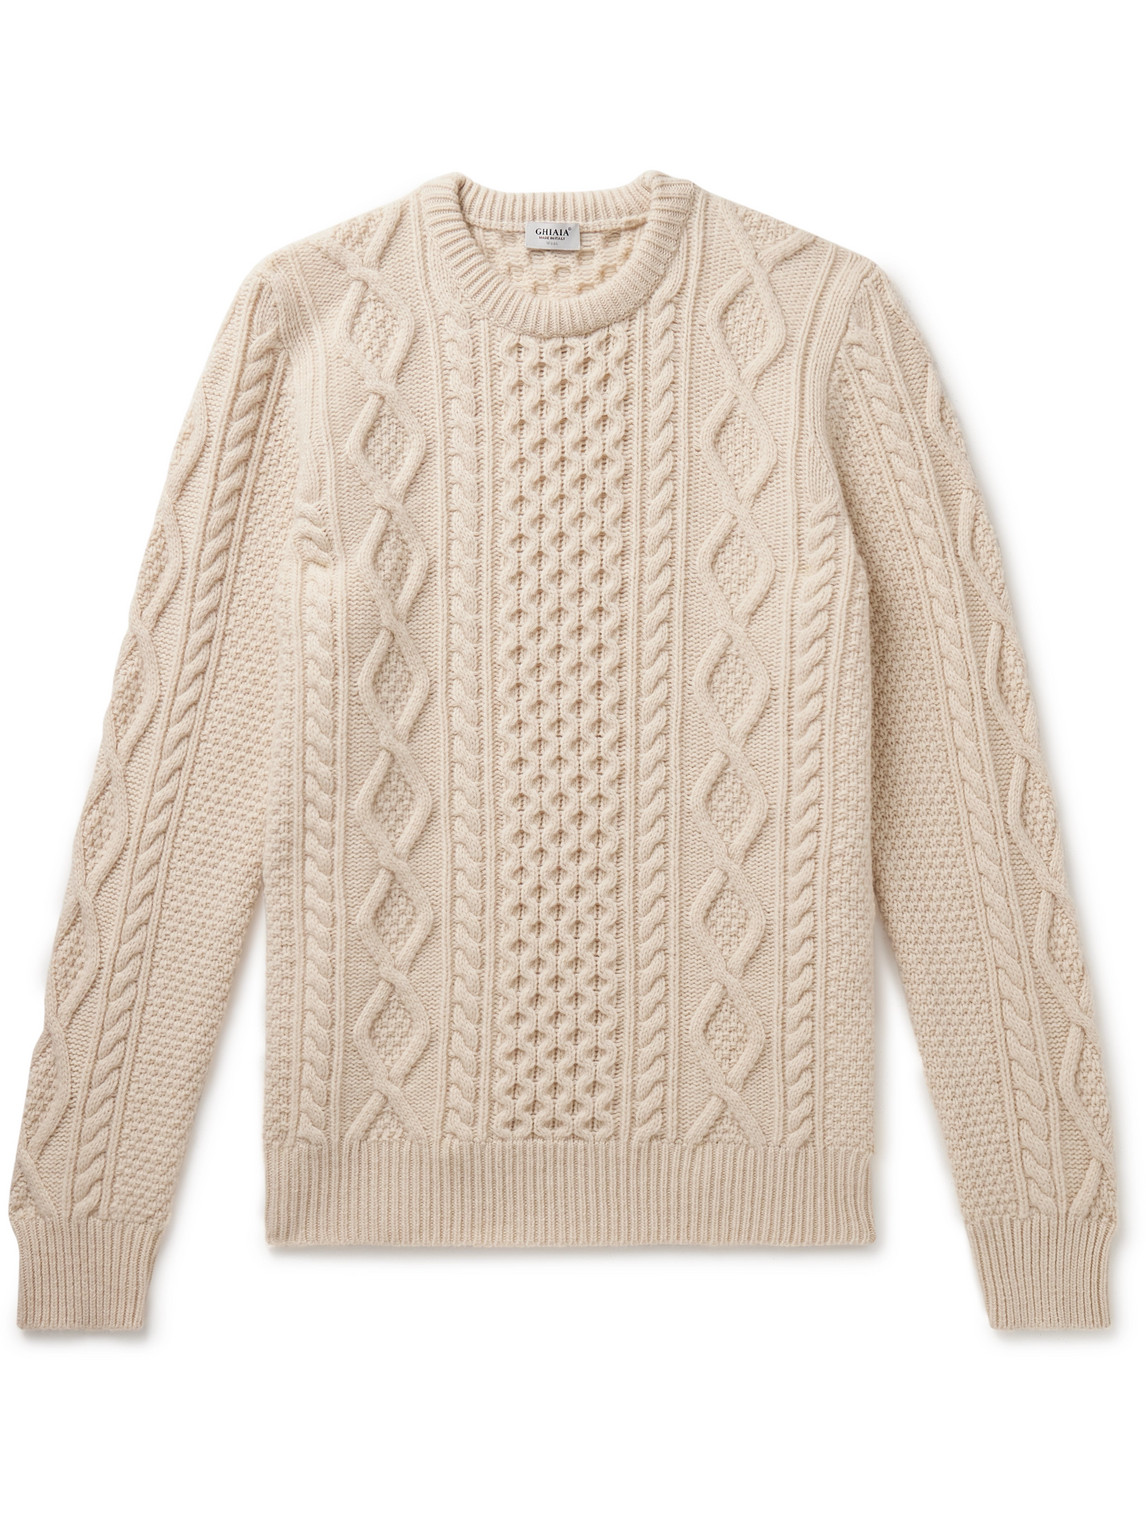 Ghiaia Cashmere Pescatore Cable-Knit Wool Sweater